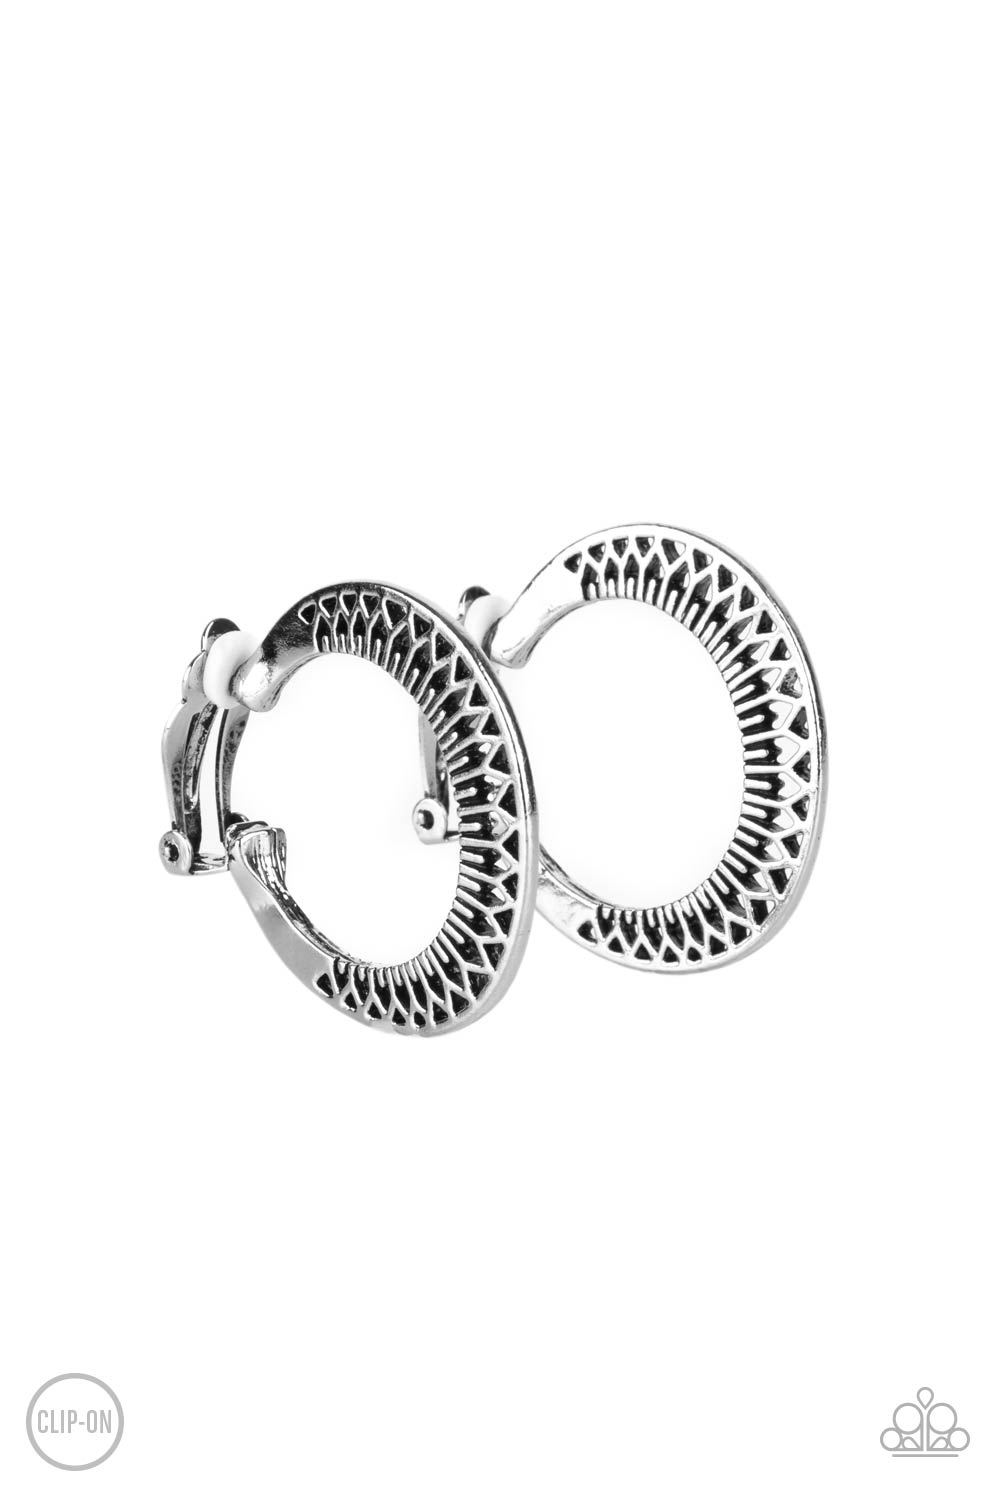 Paparazzi Moon Child Charisma - Silver Clip-On Earrings - A Finishing Touch Jewelry